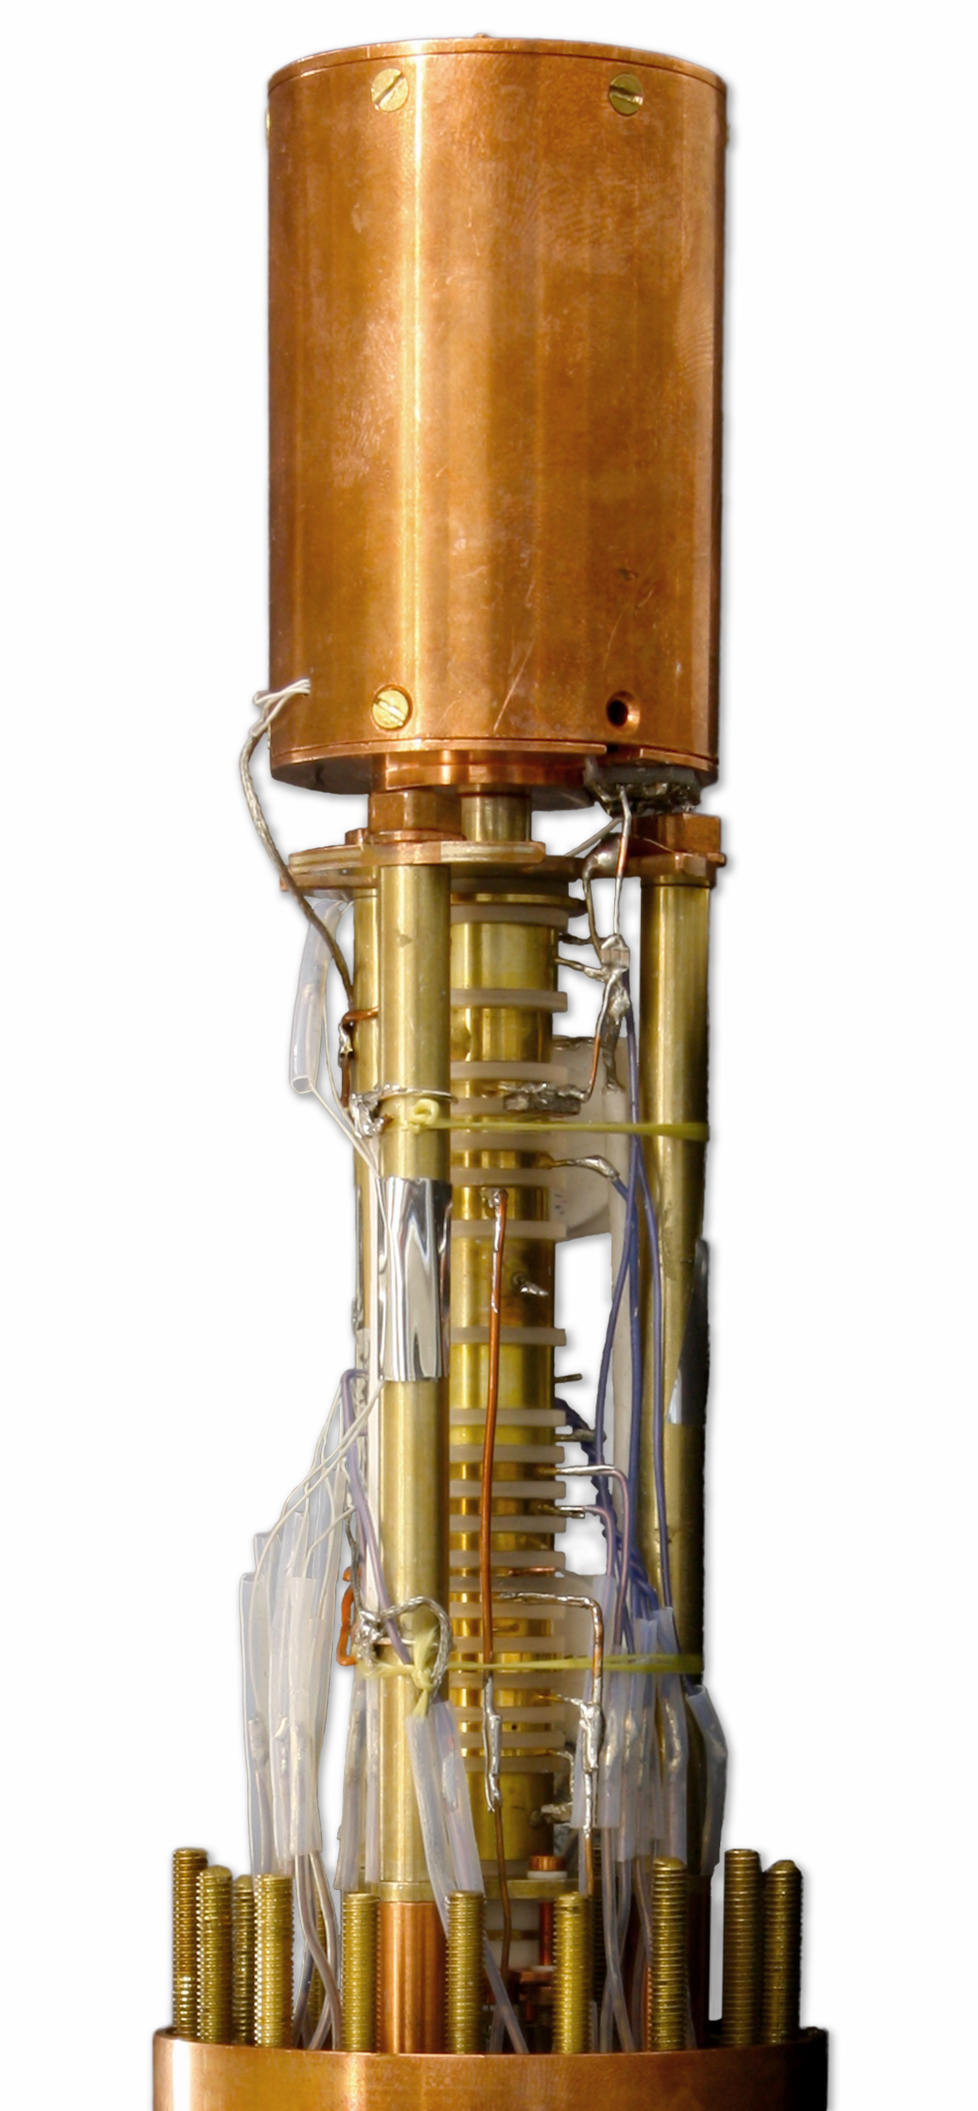 An image of the proton trap used in the experiment.